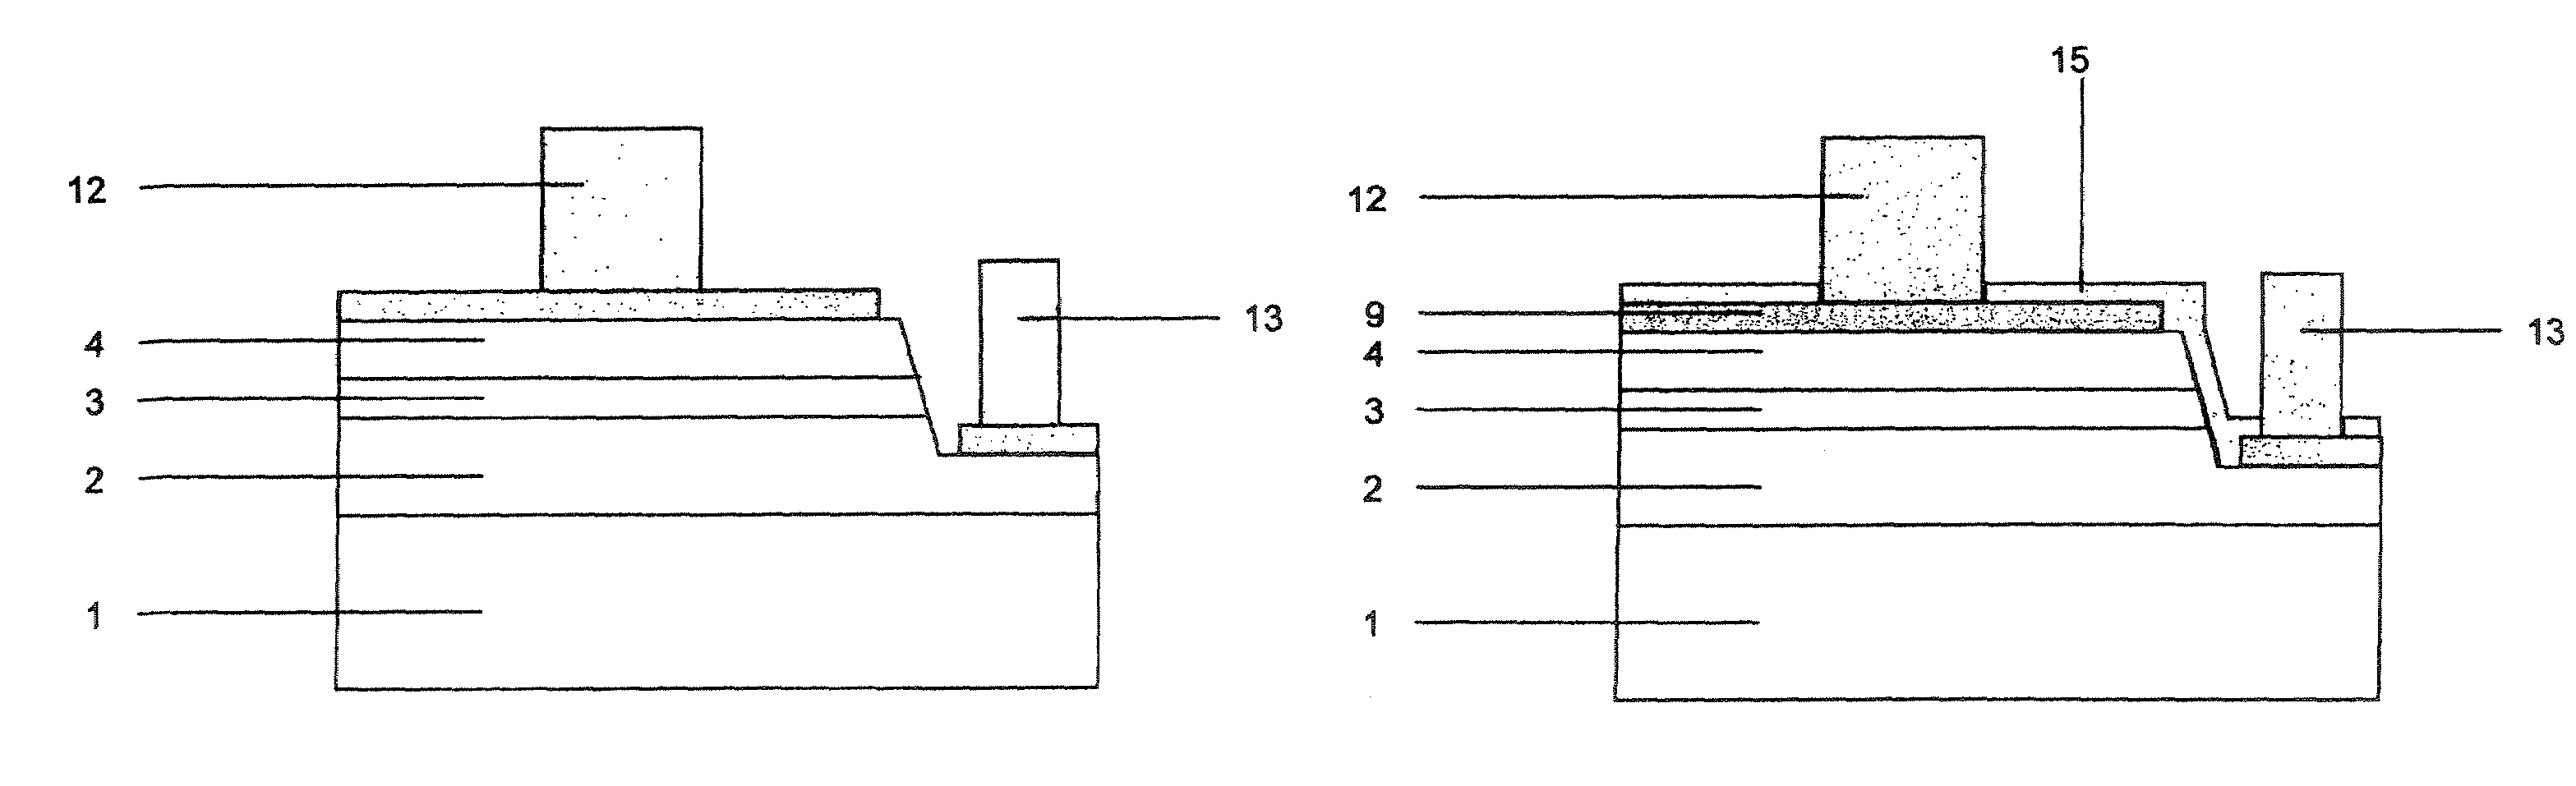 Fabrication method of GaN power LEDs with electrodes formed by composite optical coatings